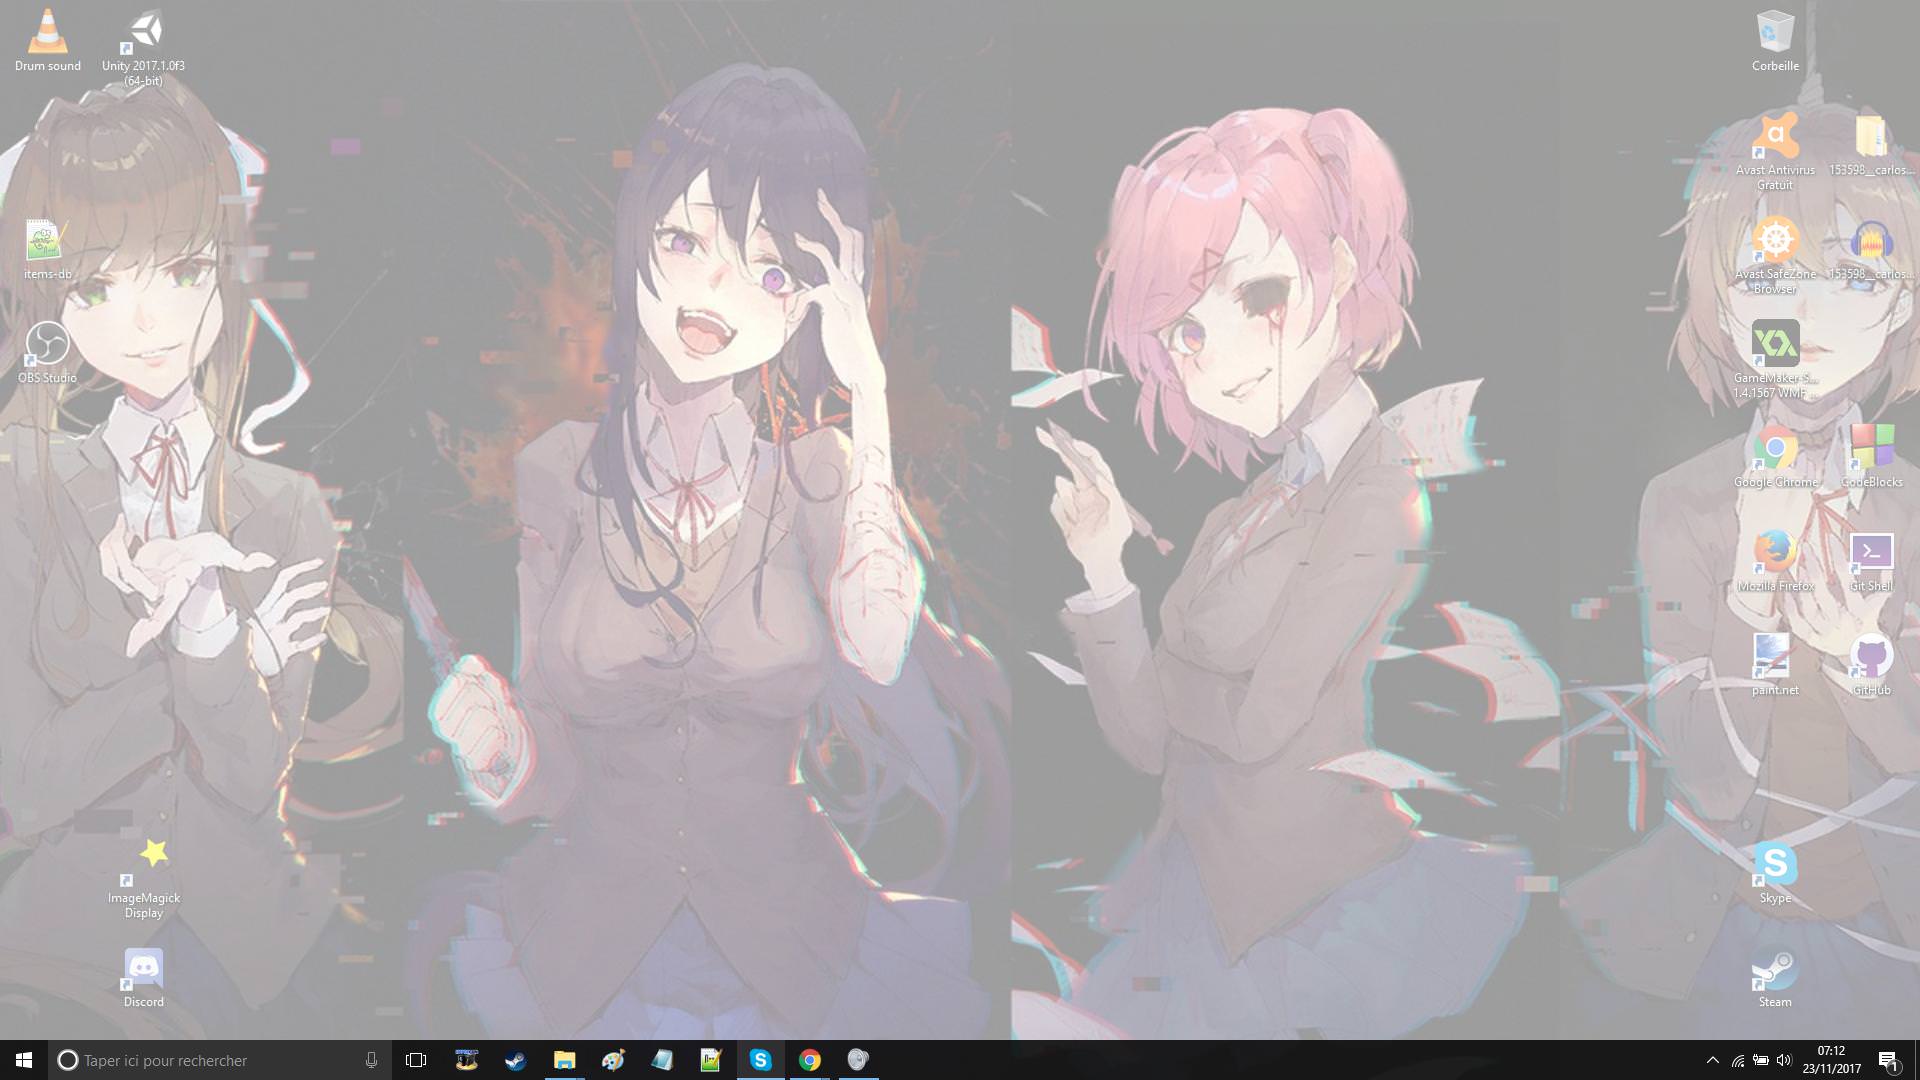 My desktop crashed right after I changed my wallpaper. I didn't